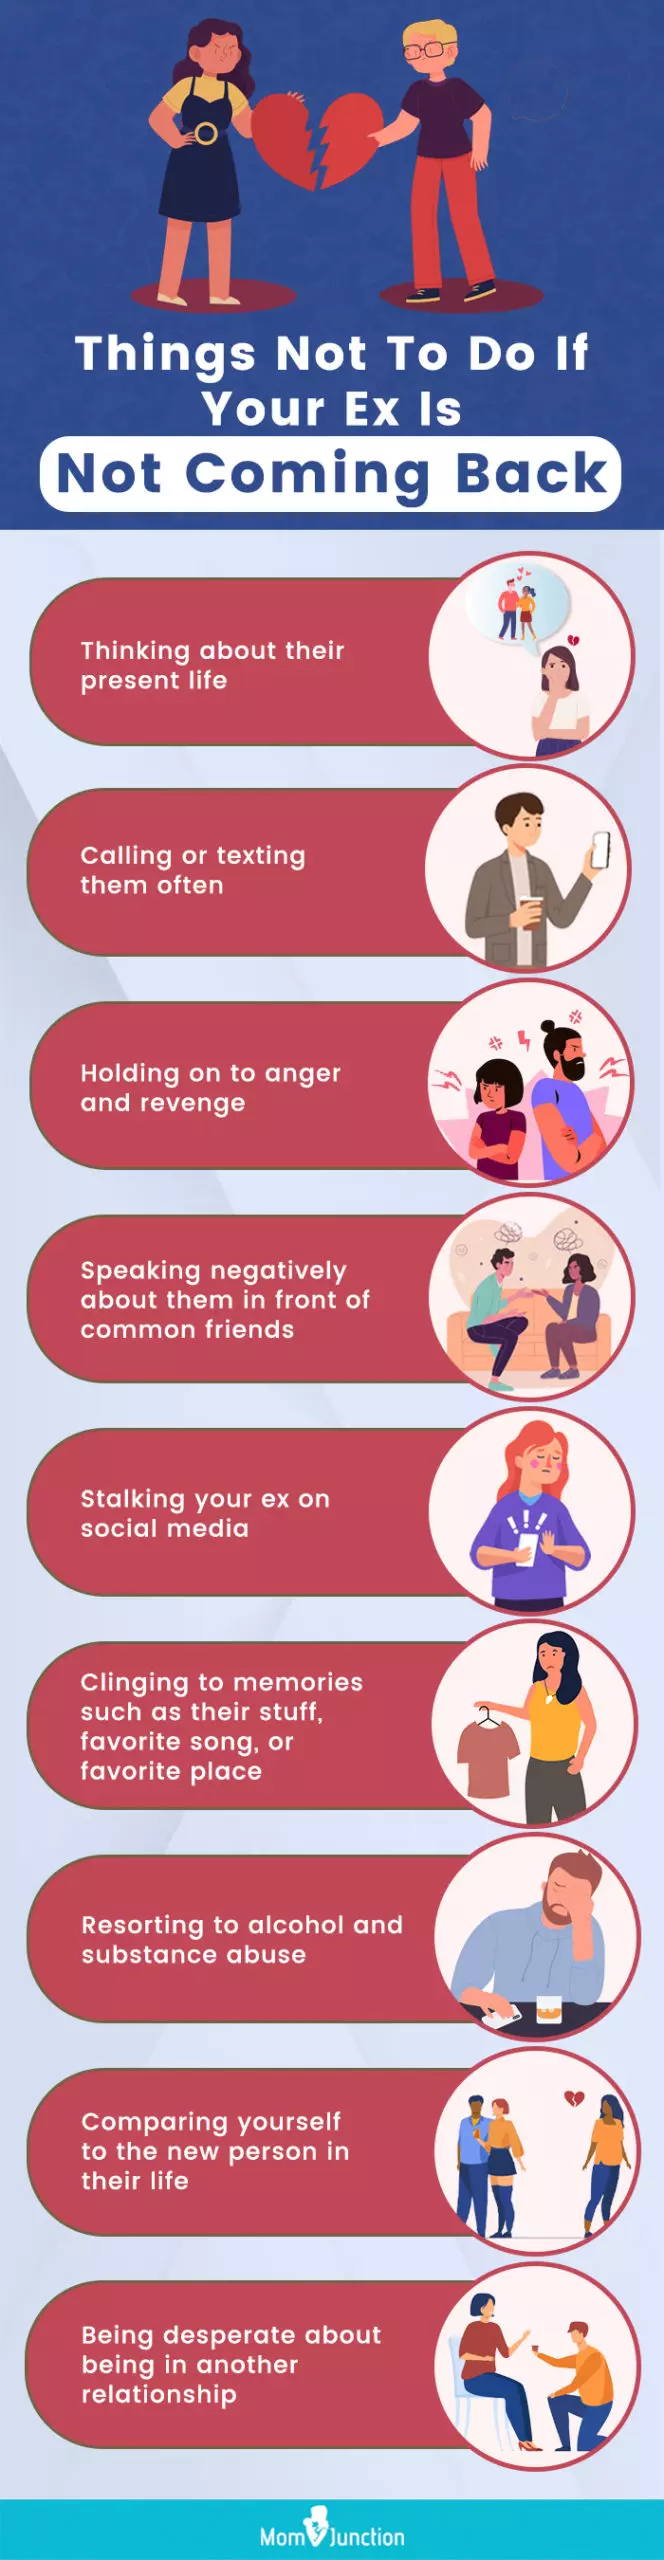 things not to do if your ex is not coming back (infographic)